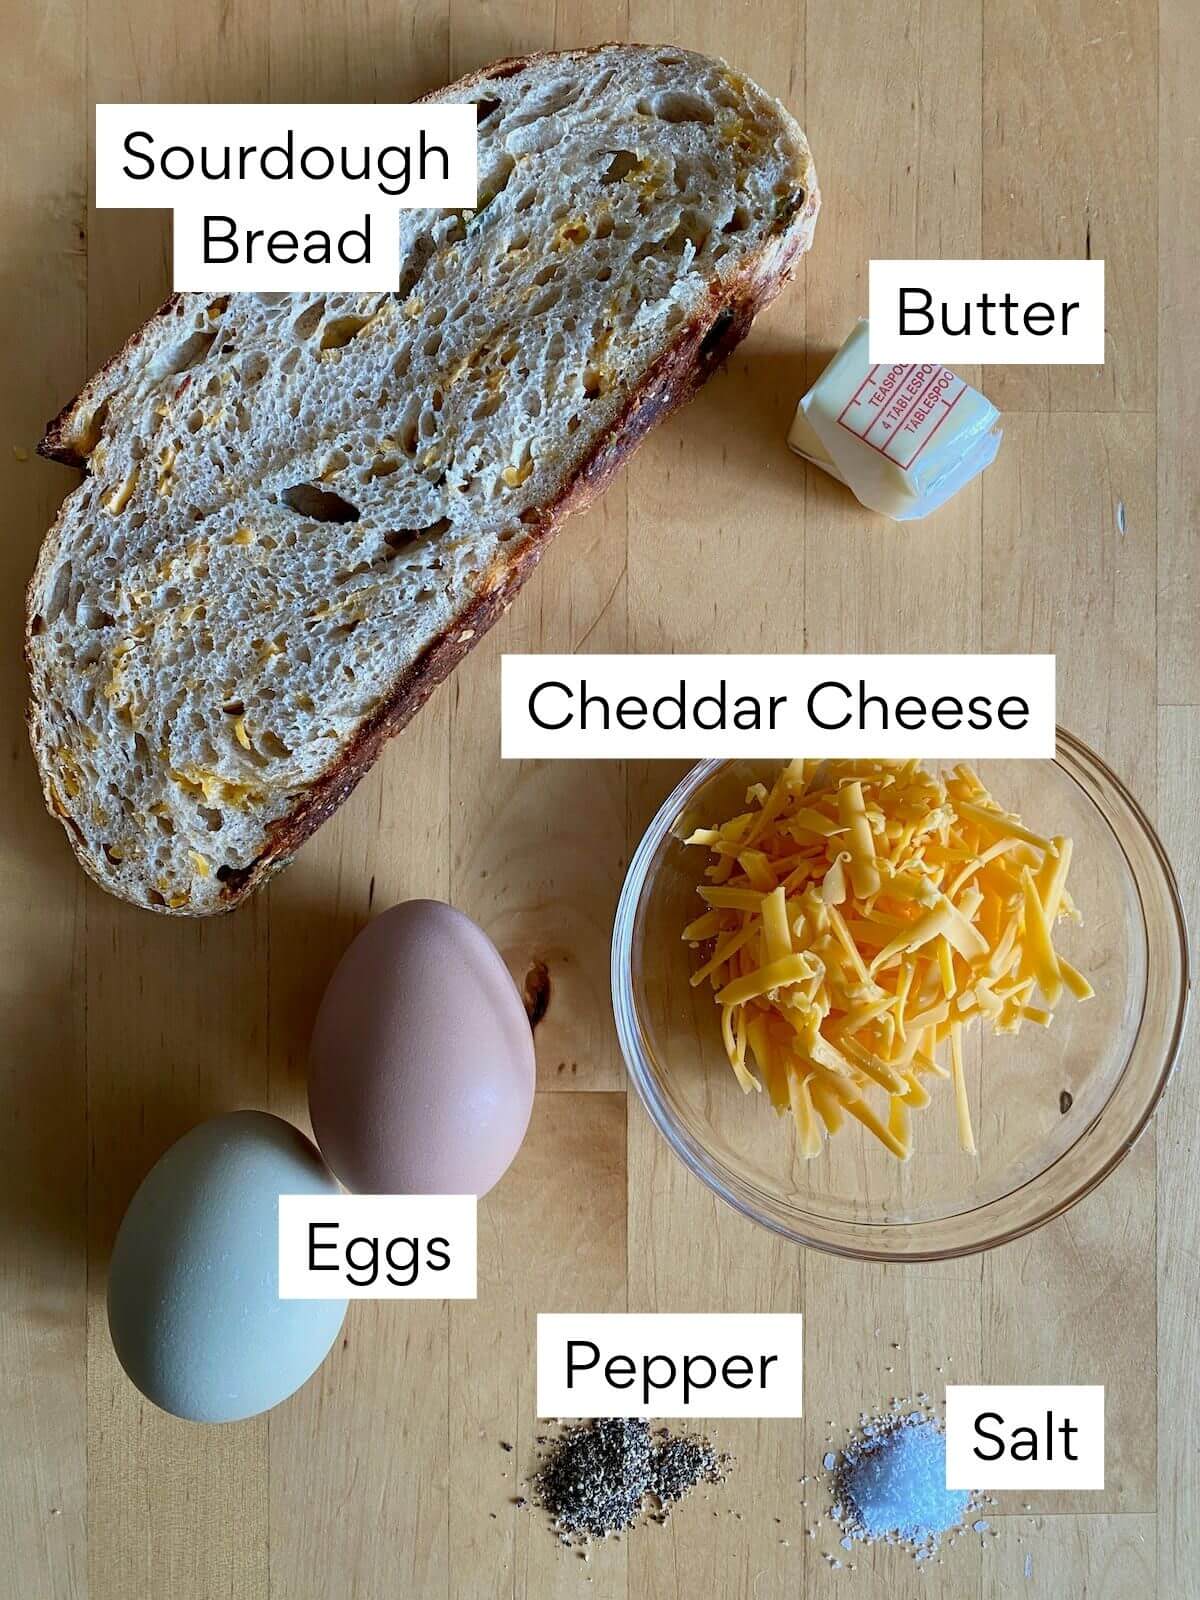 The ingredients to make scrambled eggs on toast. Each ingredient is labeled with text. They include sourdough bread, butter, cheddar cheese, eggs, pepper, and salt.